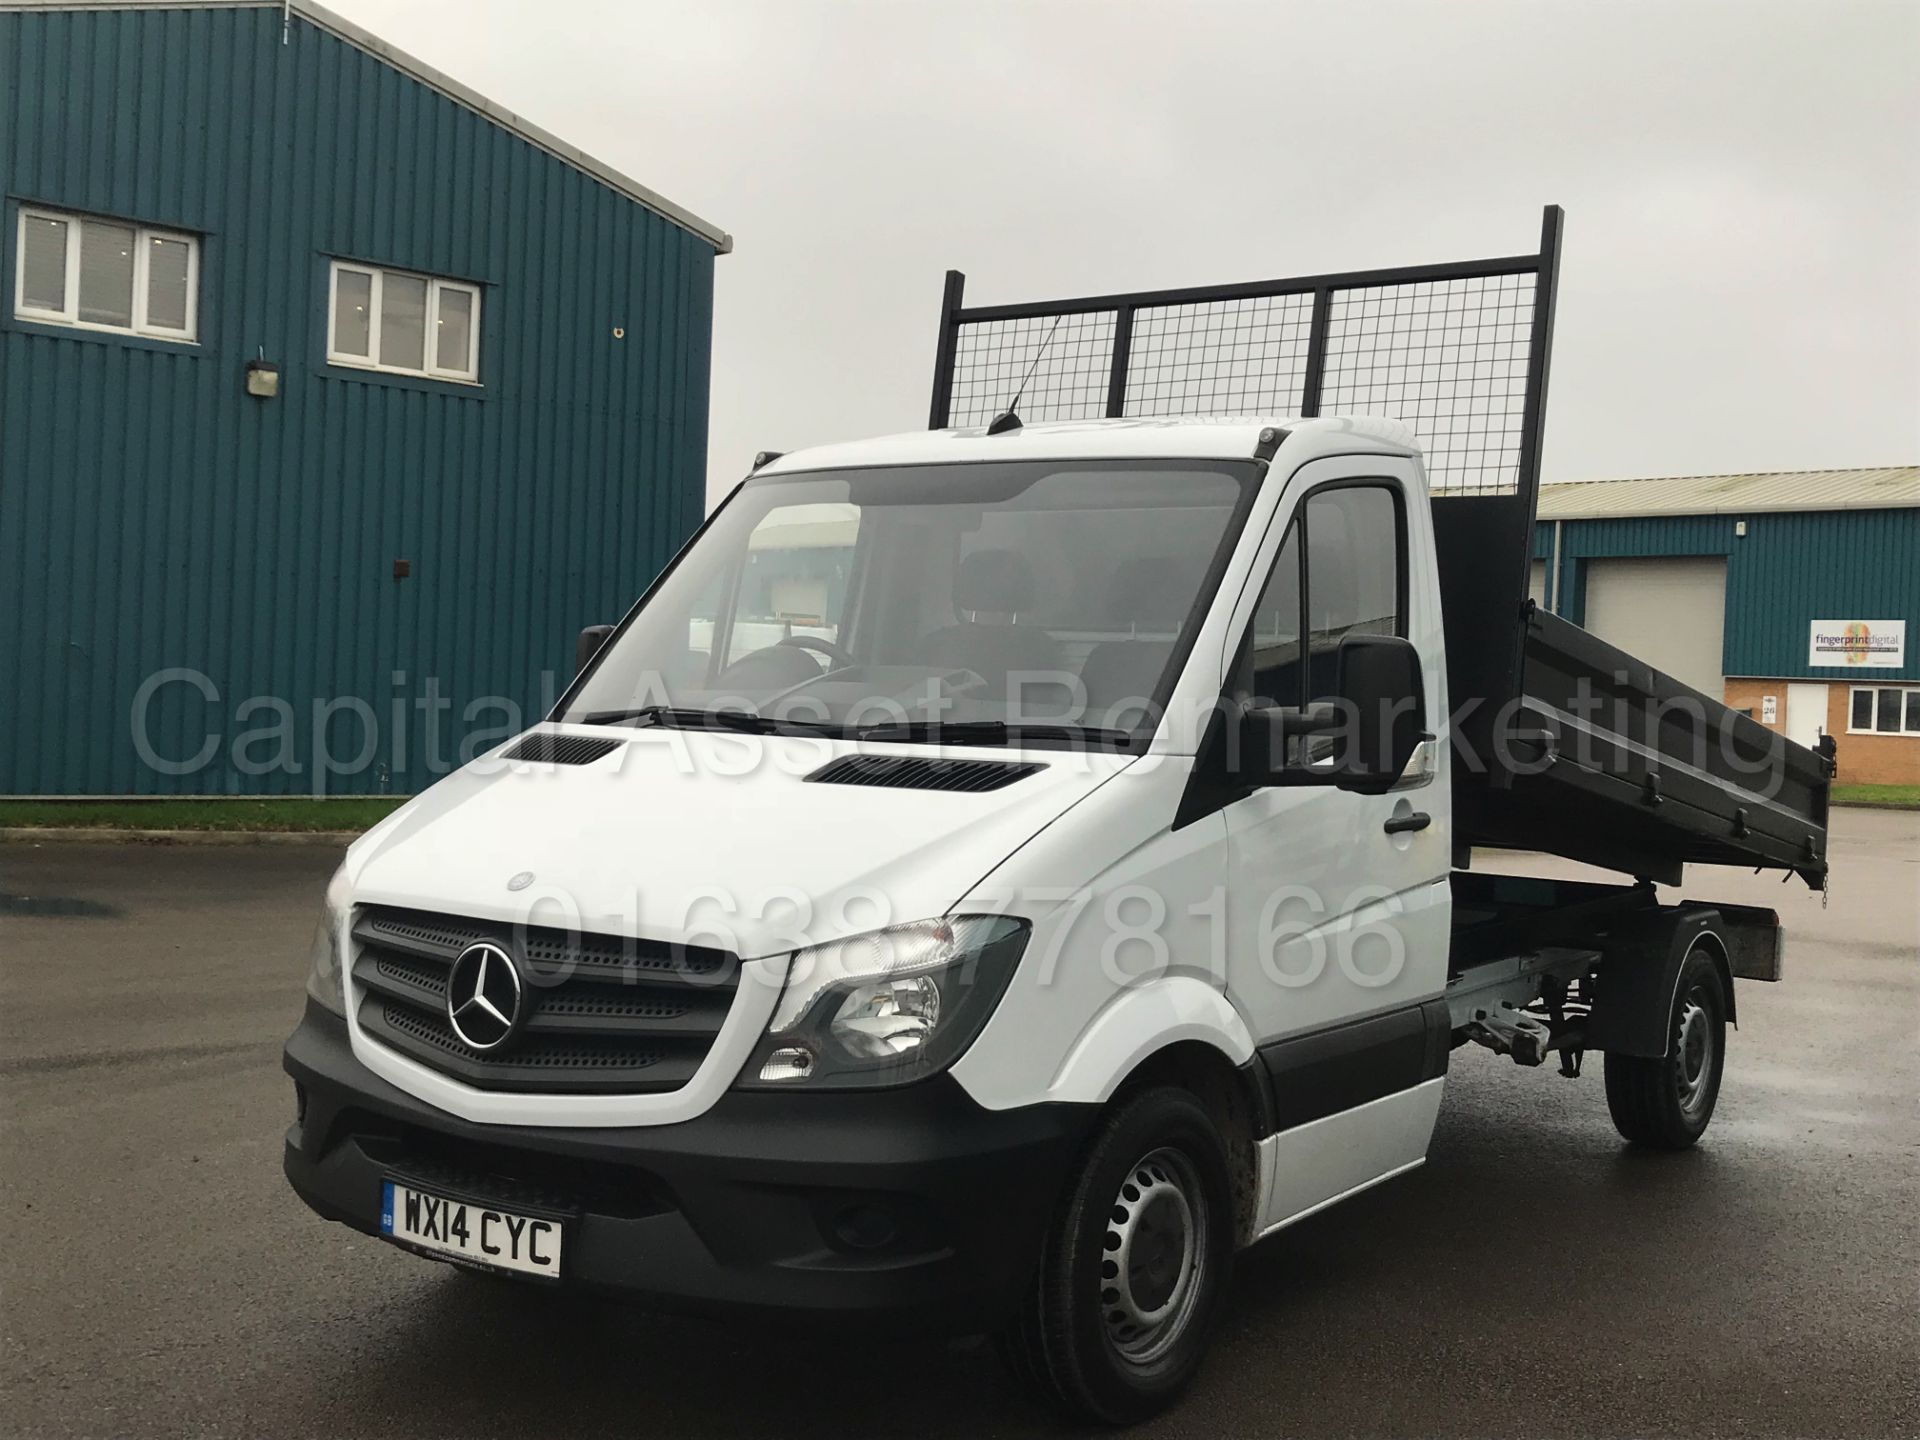 (ON SALE) MERCEDES-BENZ SPRINTER 313 CDI 'LWB - TIPPER' (2014 FACELIFT) '130 BHP -6 SPEED' *1 OWNER* - Image 2 of 24